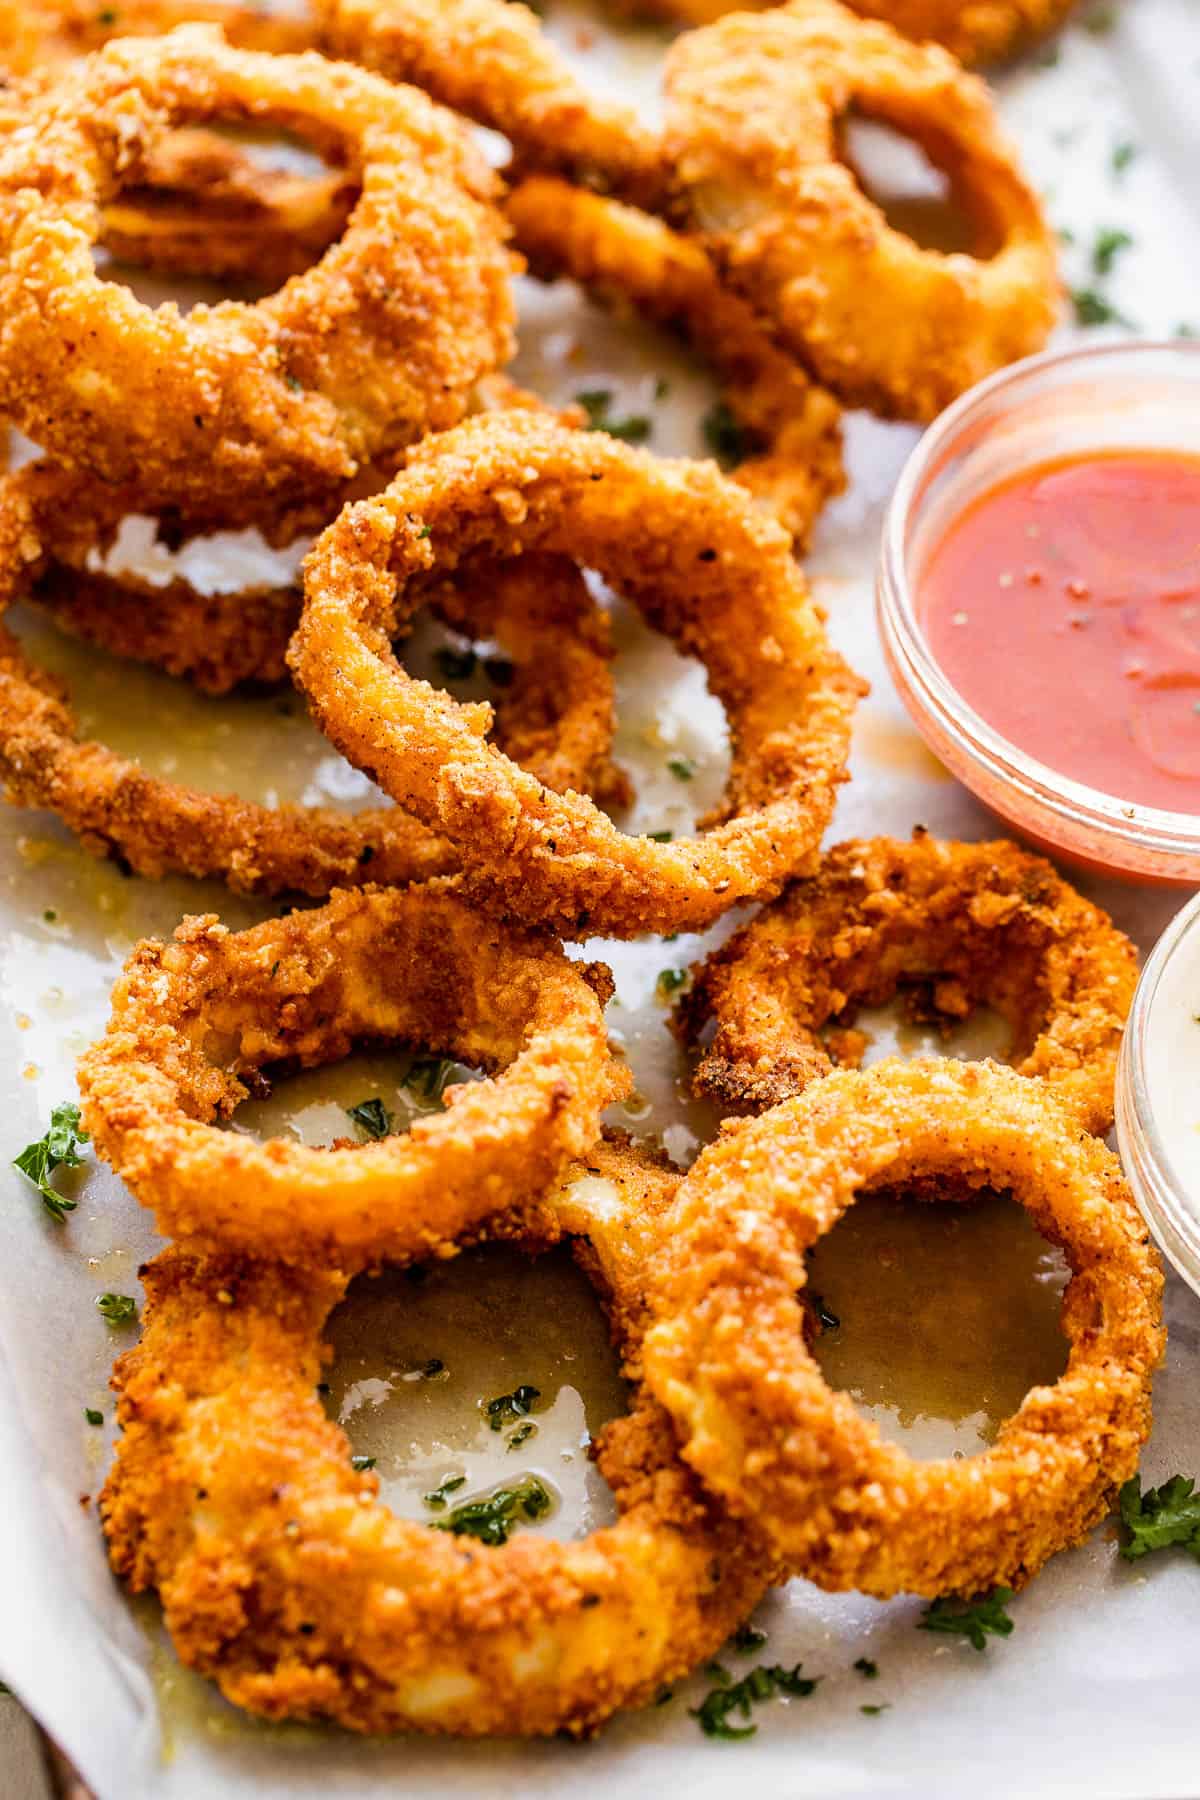 photo of onion rings served on a plate with ketchup and ranch